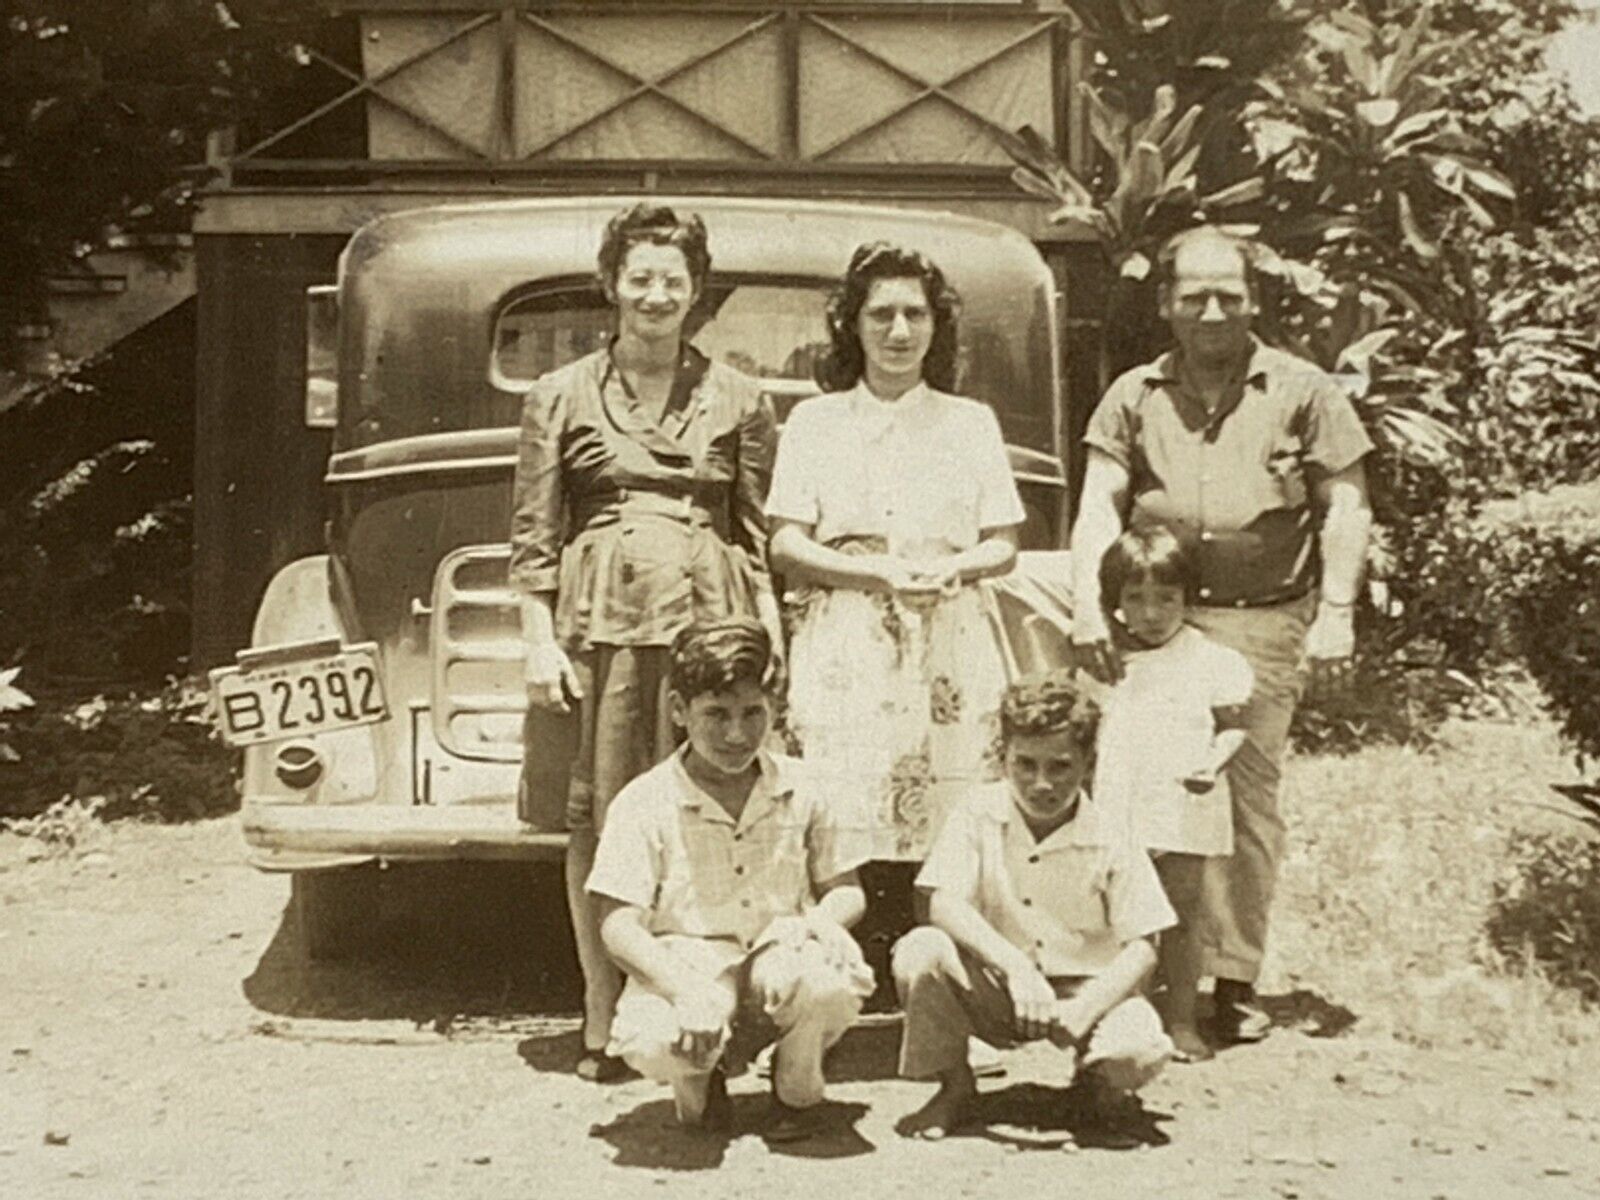 C8 Found Photograph 1940's Hawaii Family Portrait Old Car License Plate Photo 